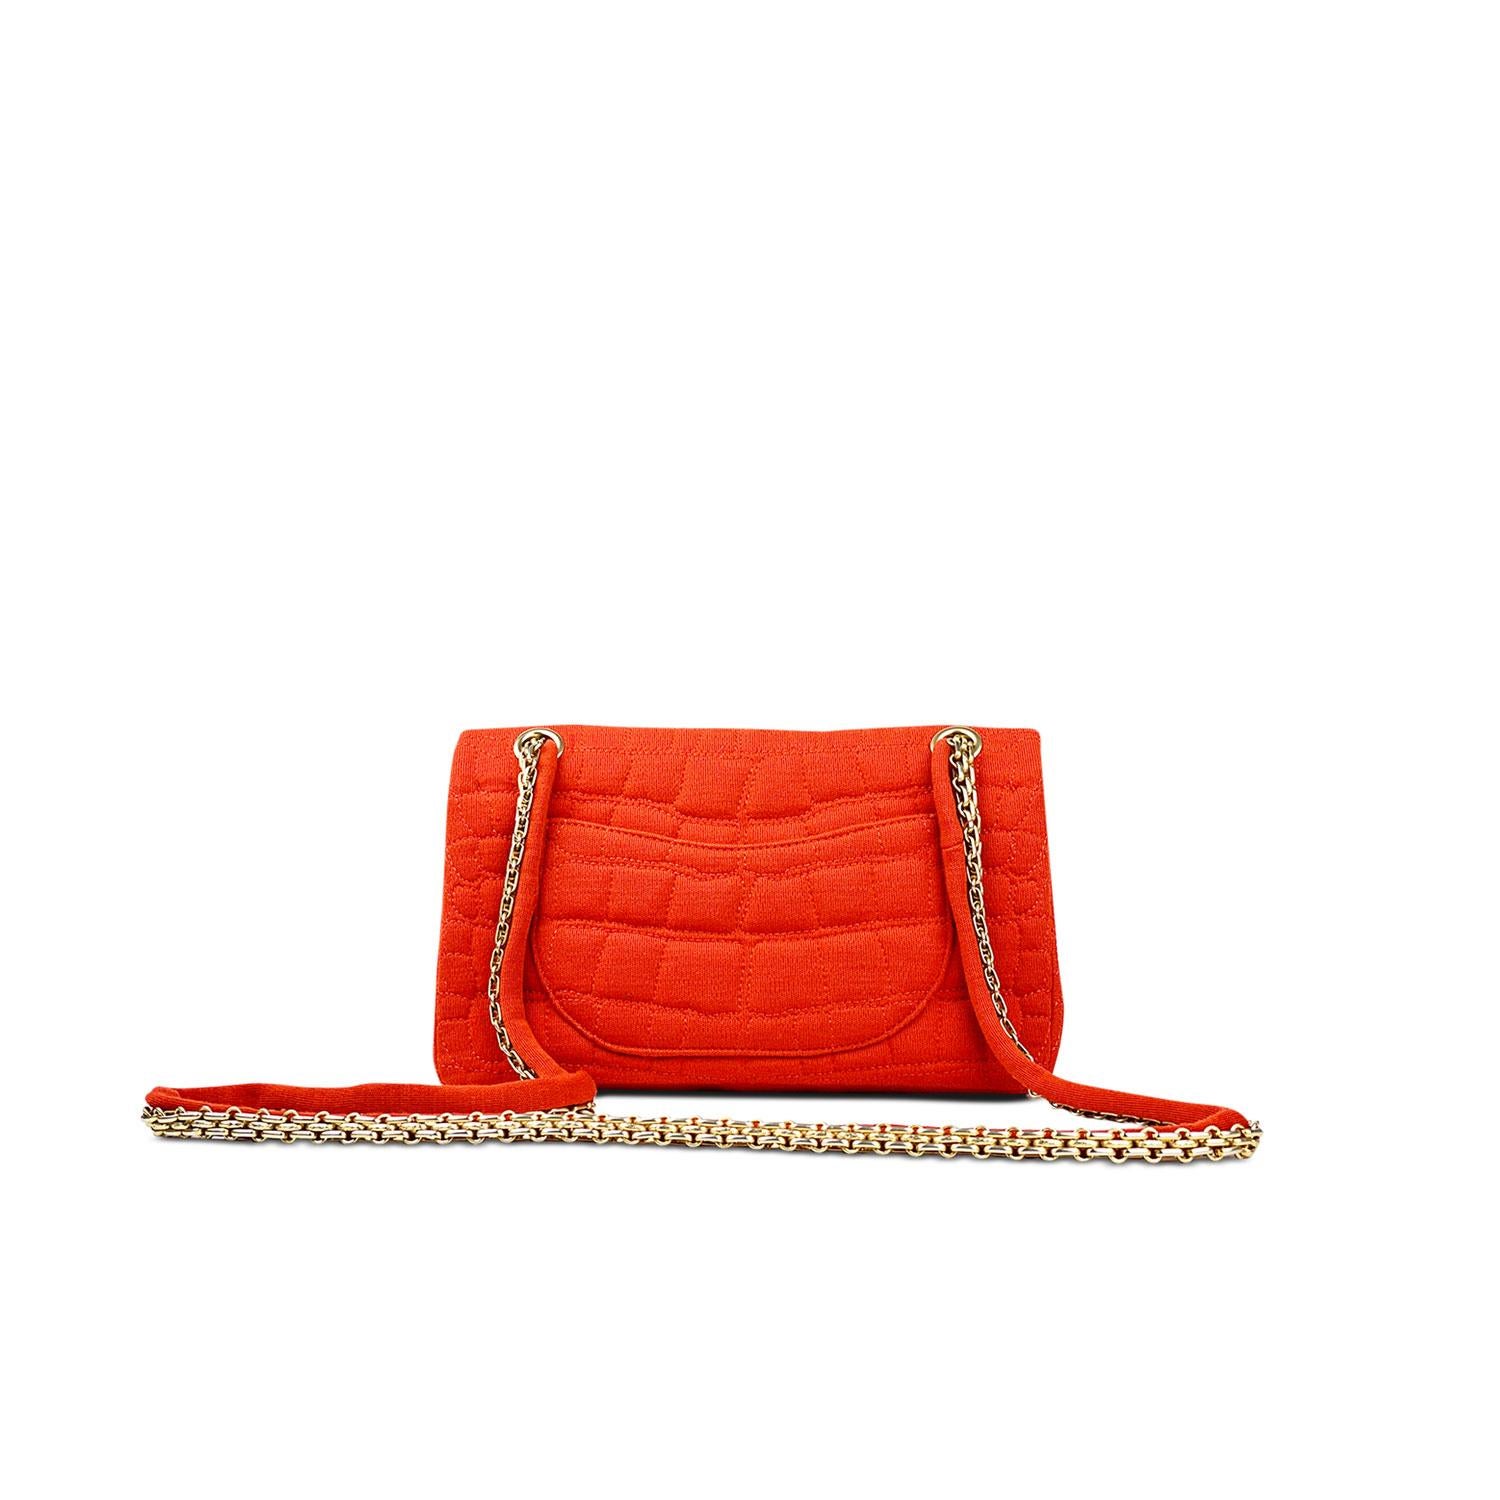 Red Chanel Croc Reissue 225 Double Flap Bag